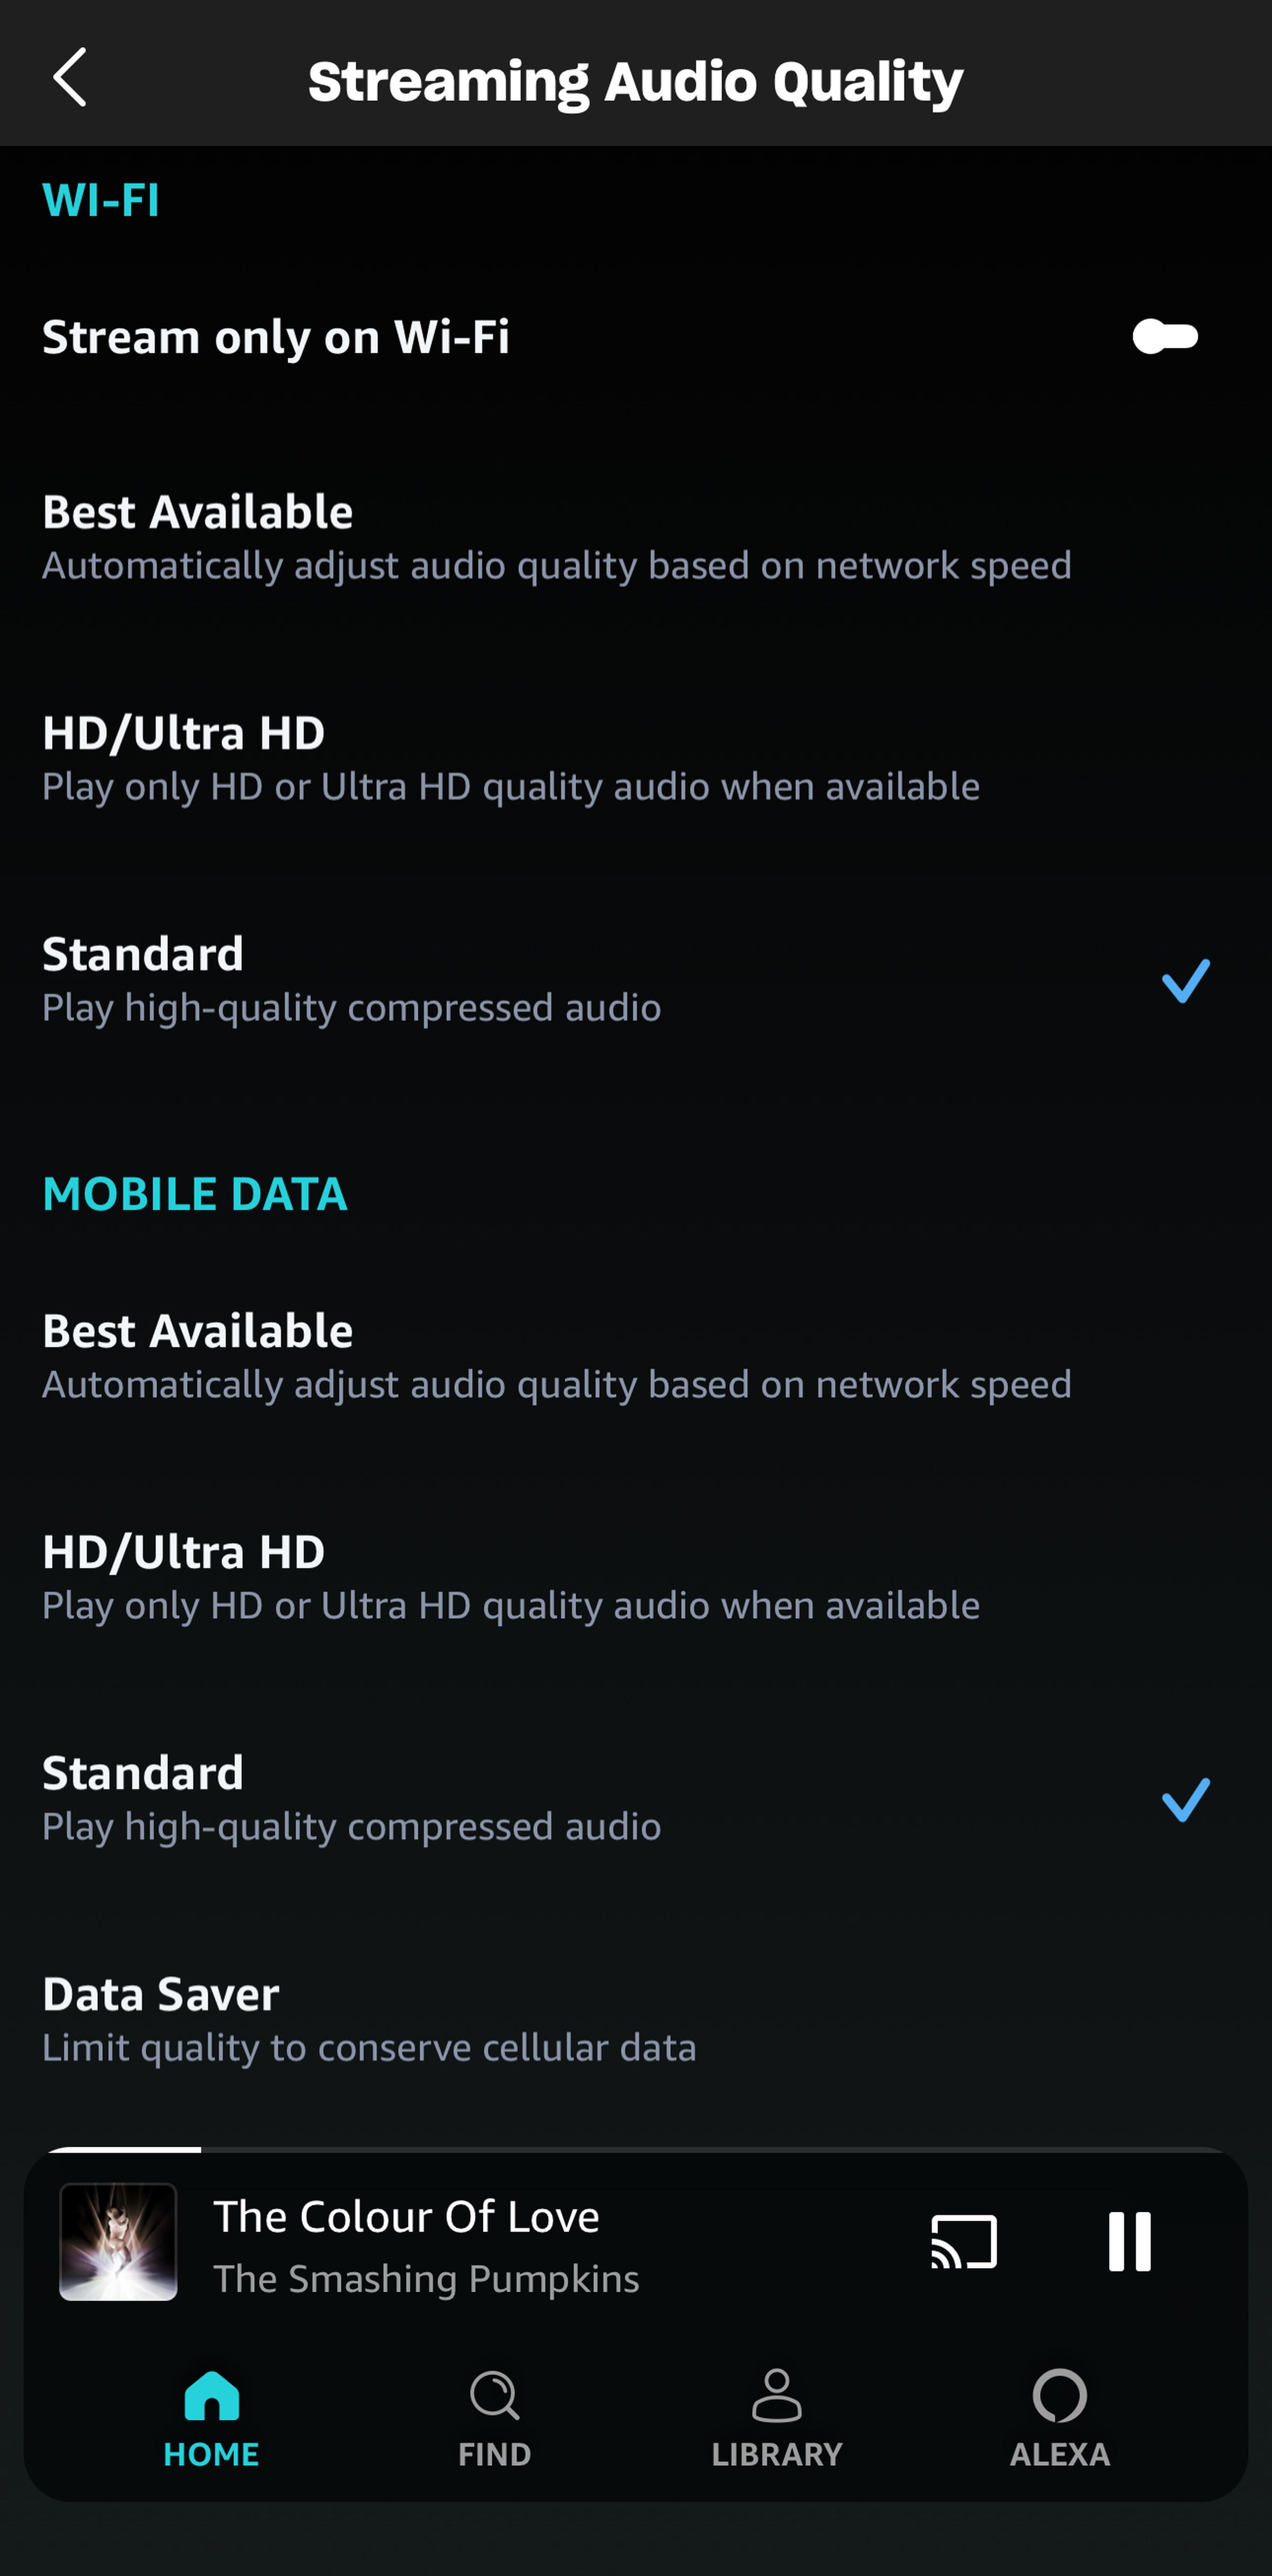 Streaming Audio Quality page in Amazon Music app.